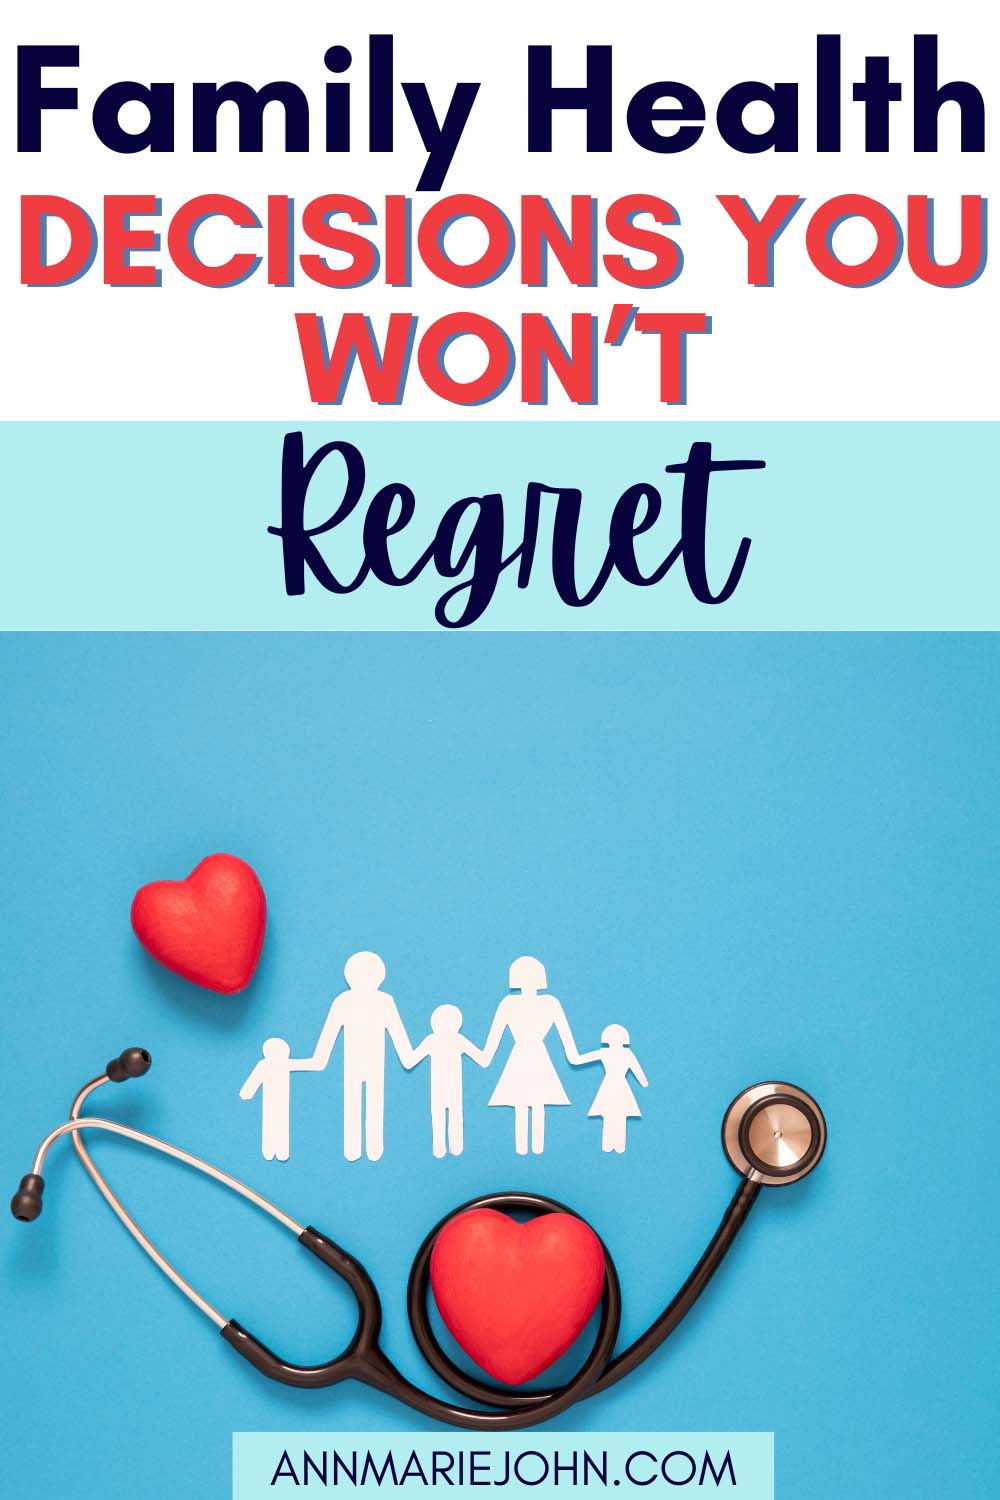 Family Health Decisions You Won't Regret